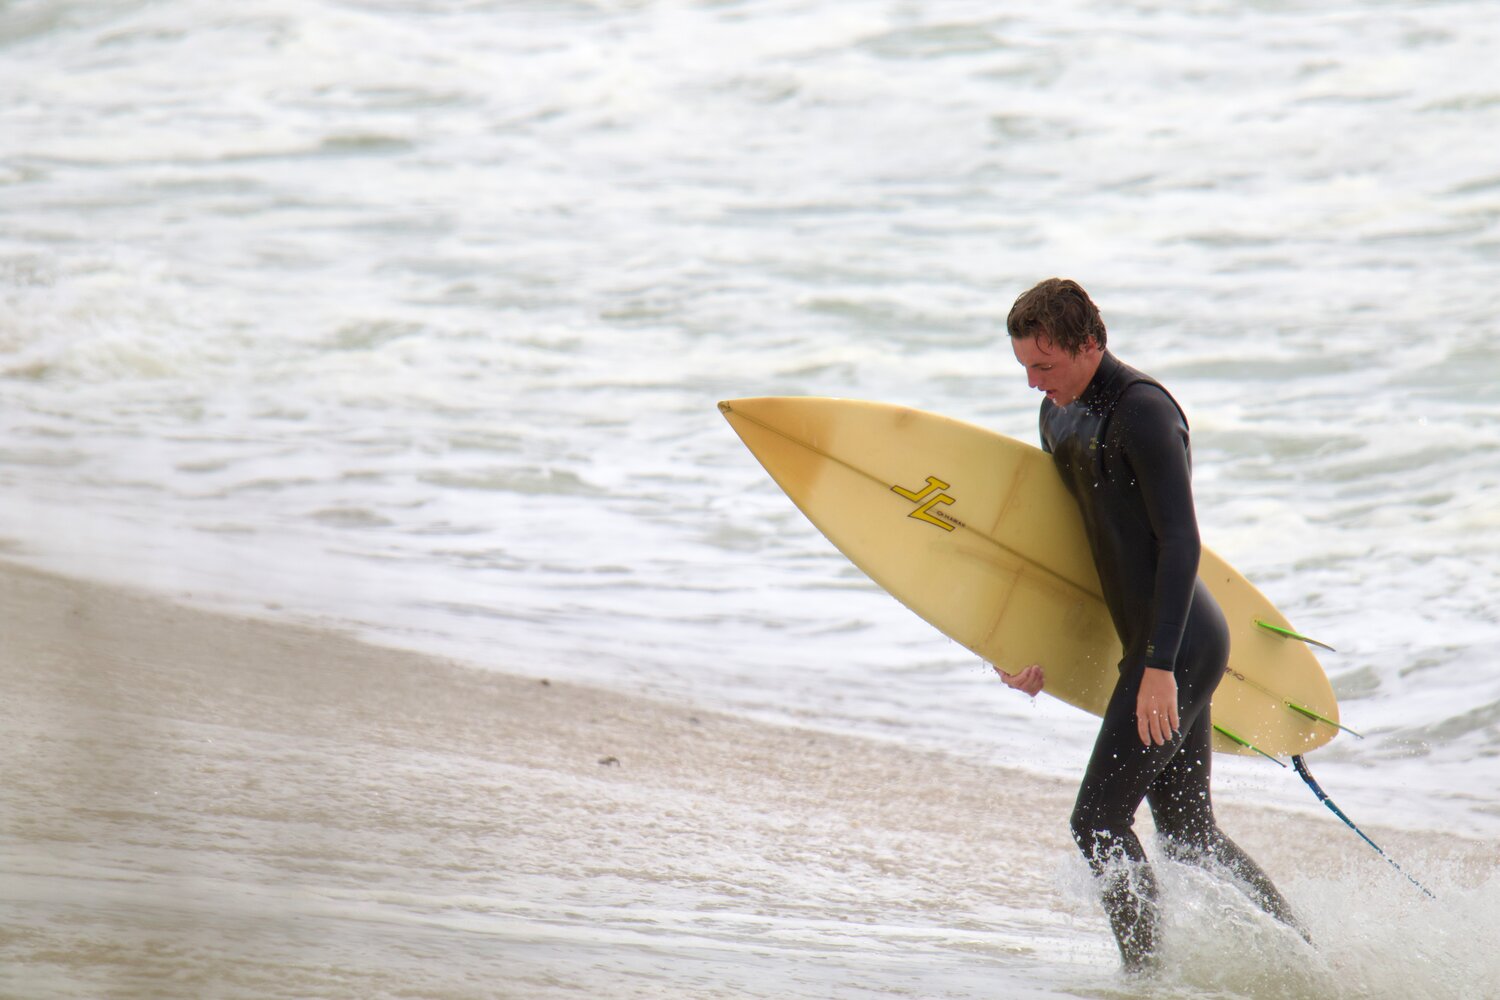 A surfer exits the water in Maddequecham Friday.